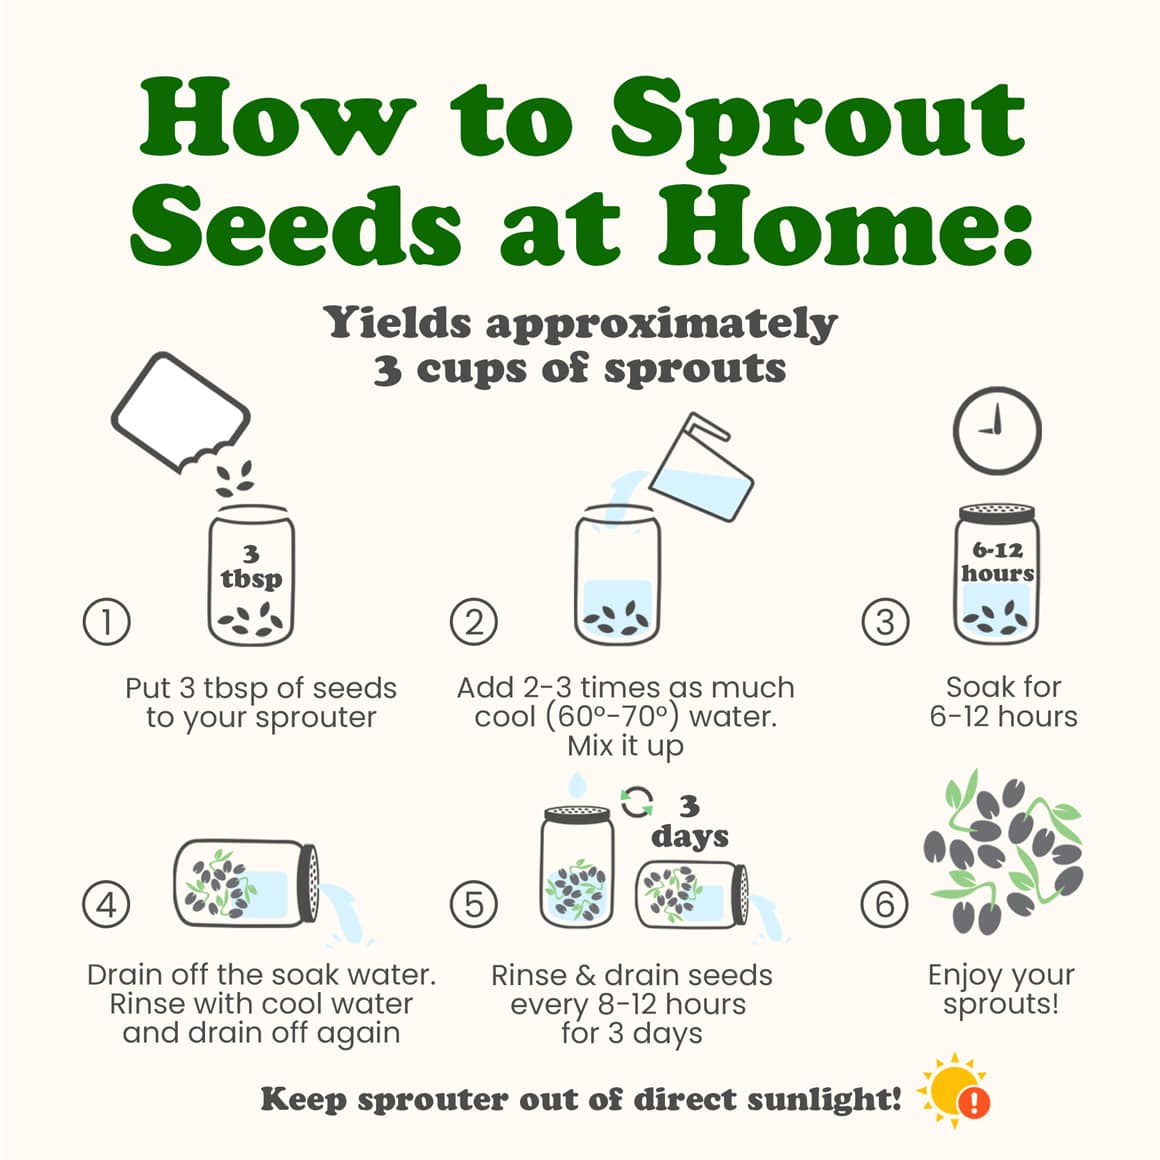 antioxidant-mix-of-sprouting-seeds-5-min